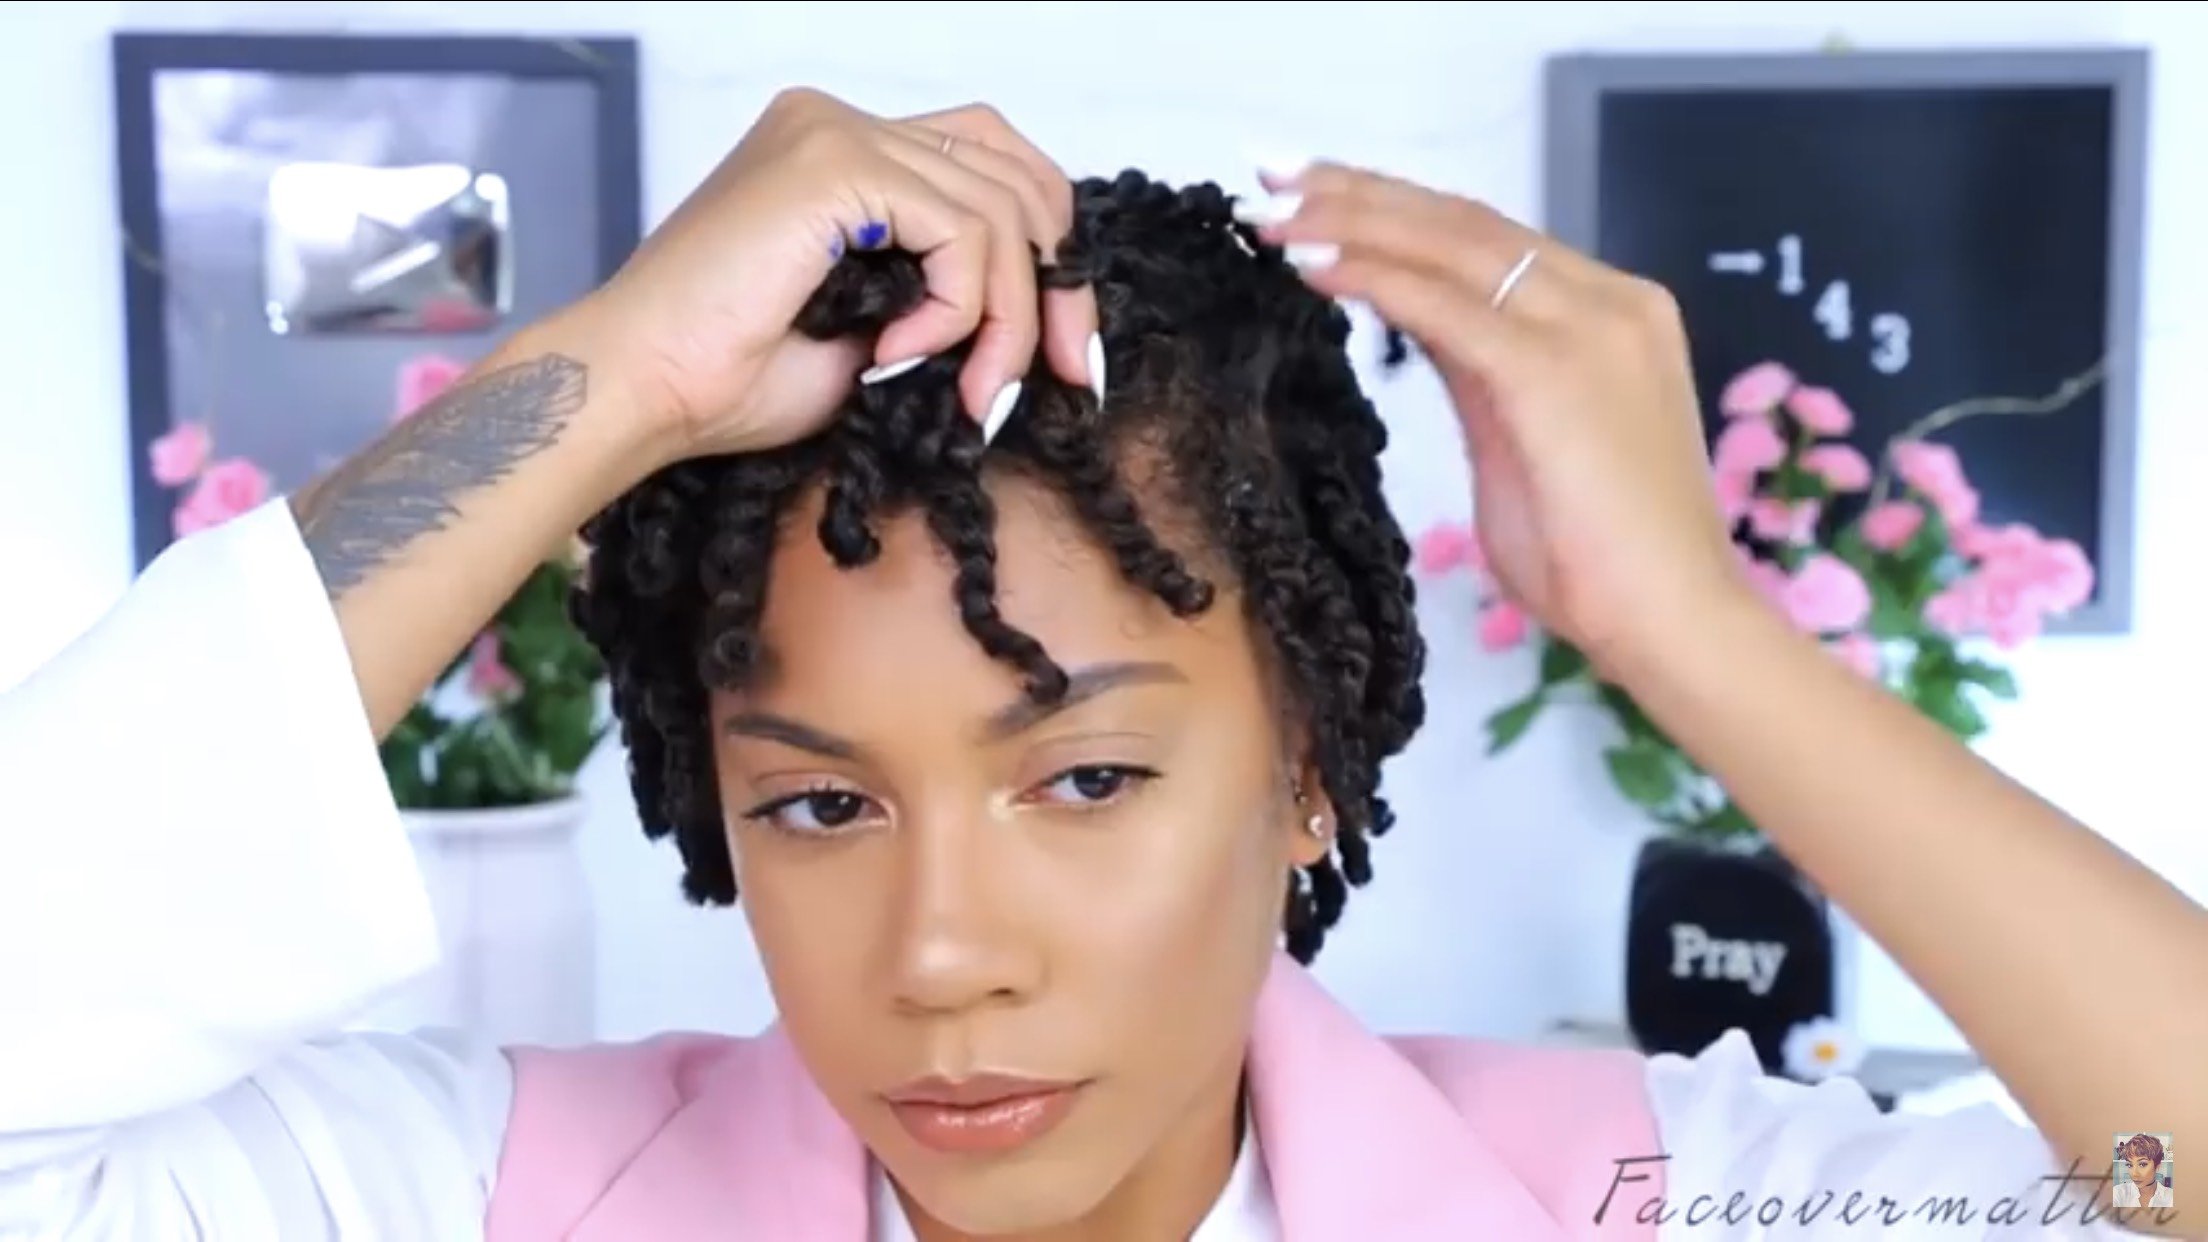 A photo of a woman with two-strand twists | Source: YouTube/ faceovermatter